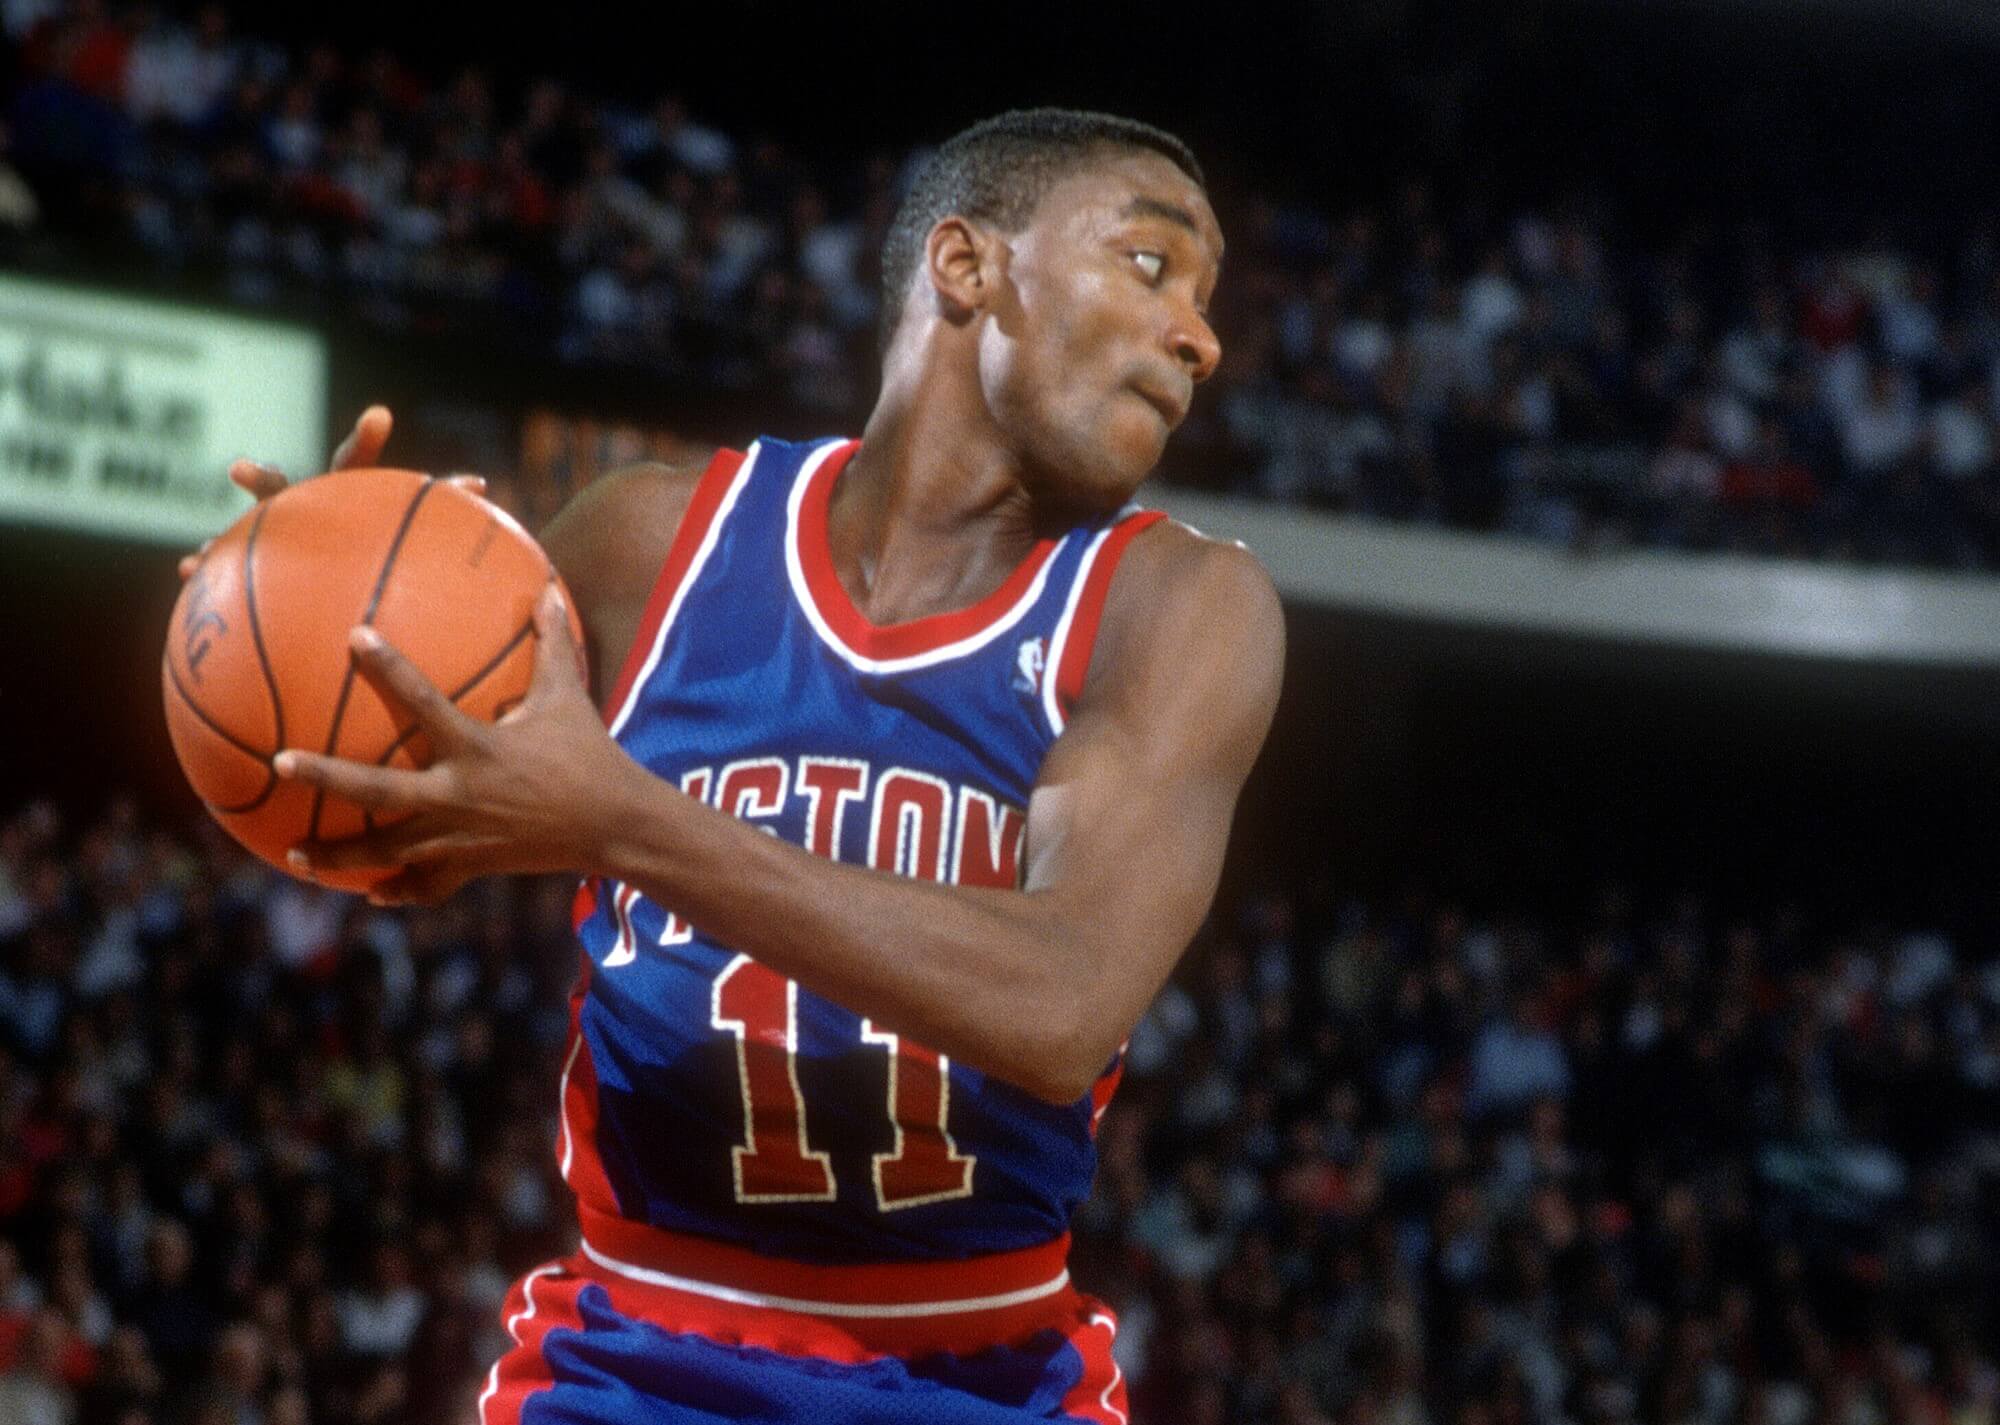 Isiah Thomas of the Detroit Pistons grabs a rebound against the Chicago Bulls.